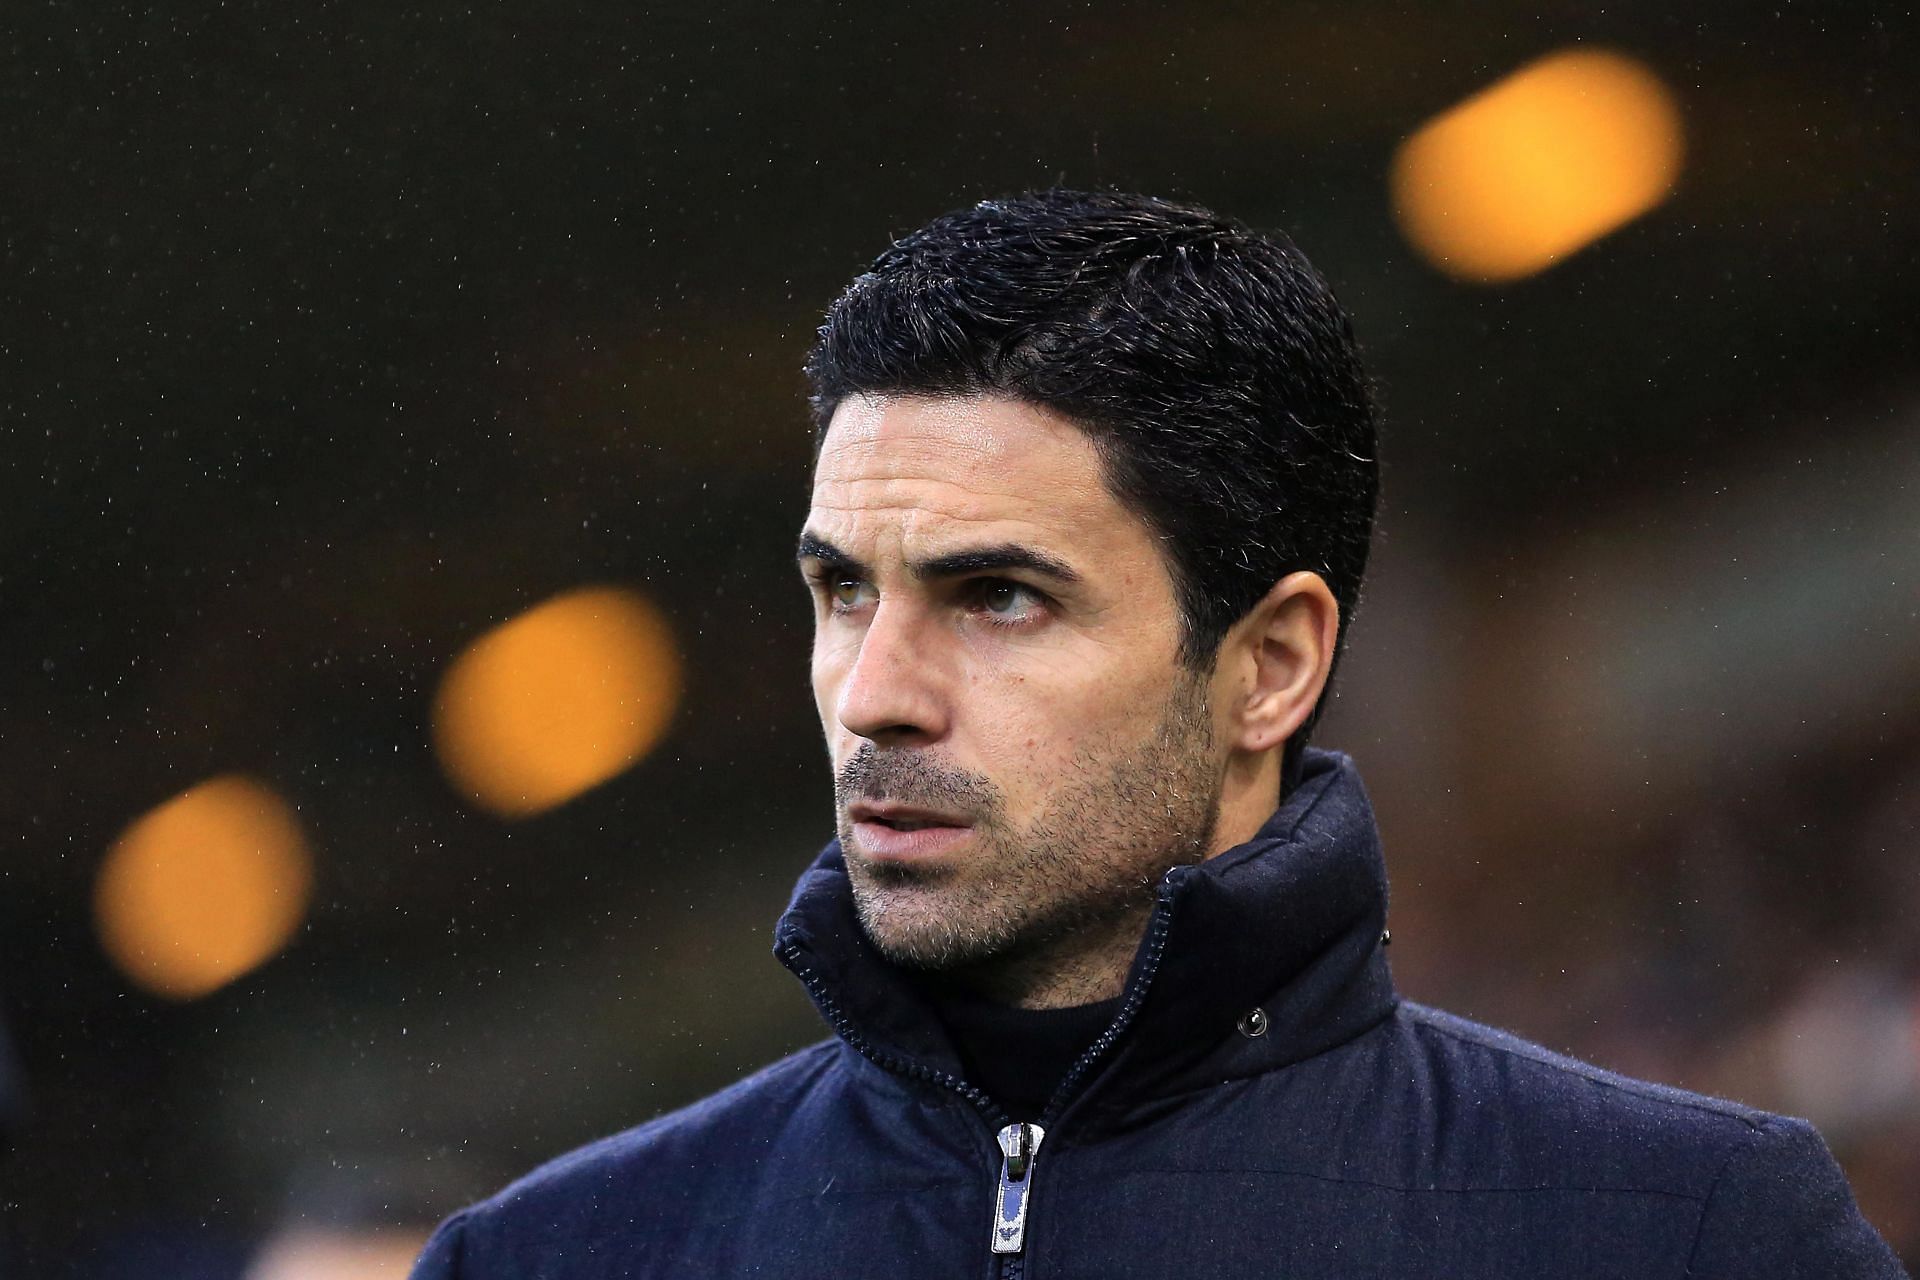 Arsenal manager Mikel Arteta wants to secure a top-four finish in the Premier League.